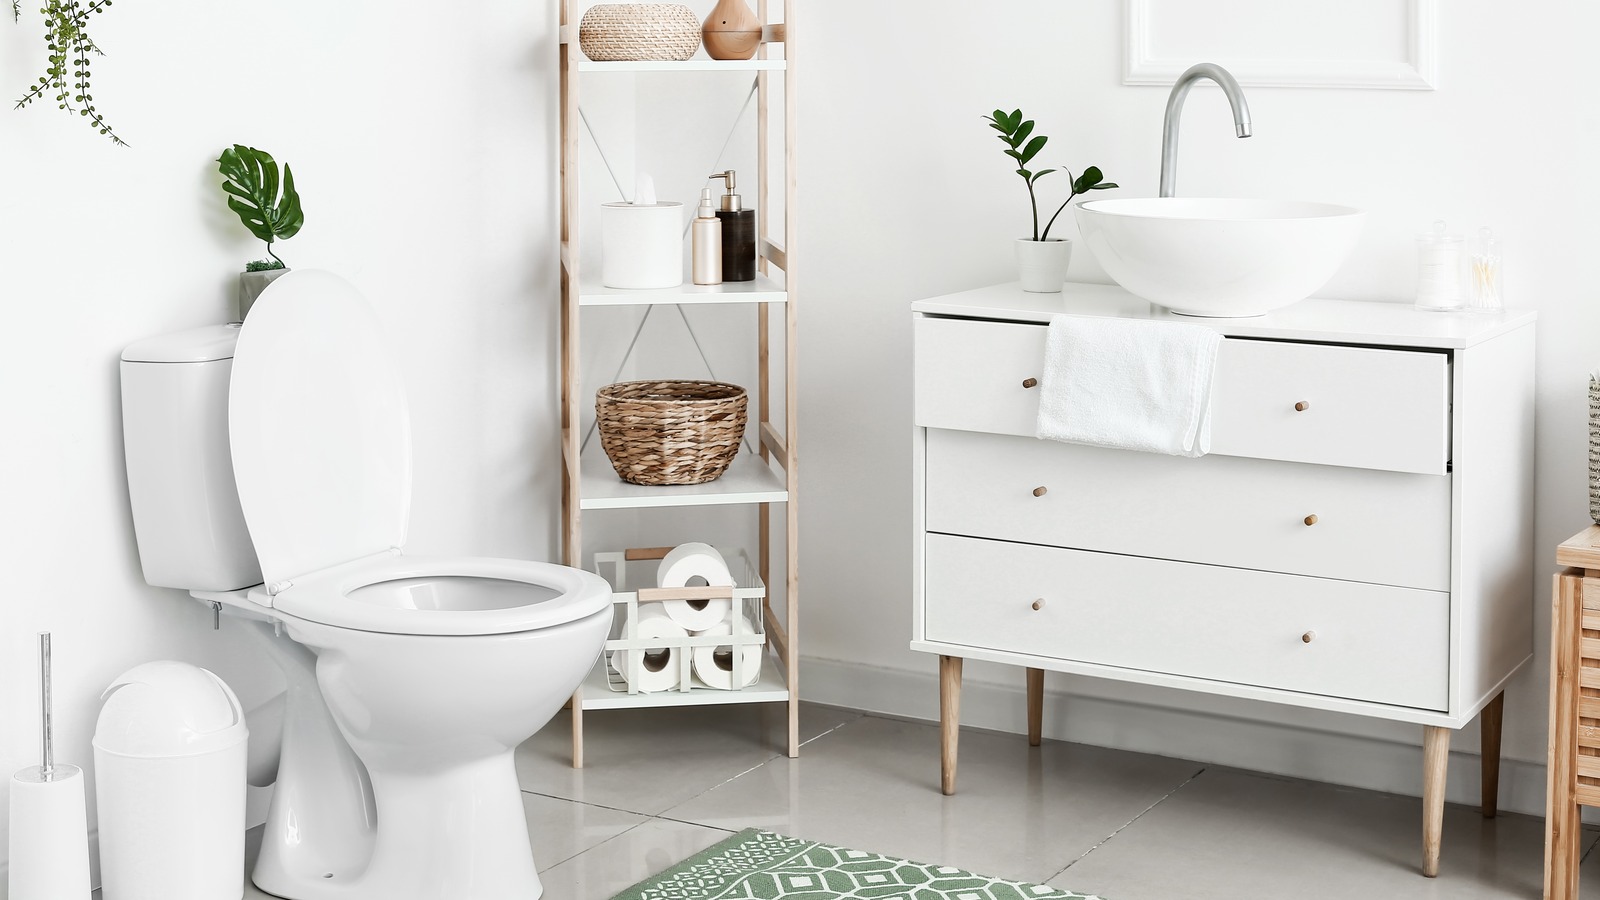 https://www.housedigest.com/img/gallery/12-tips-to-help-keep-your-bathroom-clutter-free/l-intro-1668612081.jpg